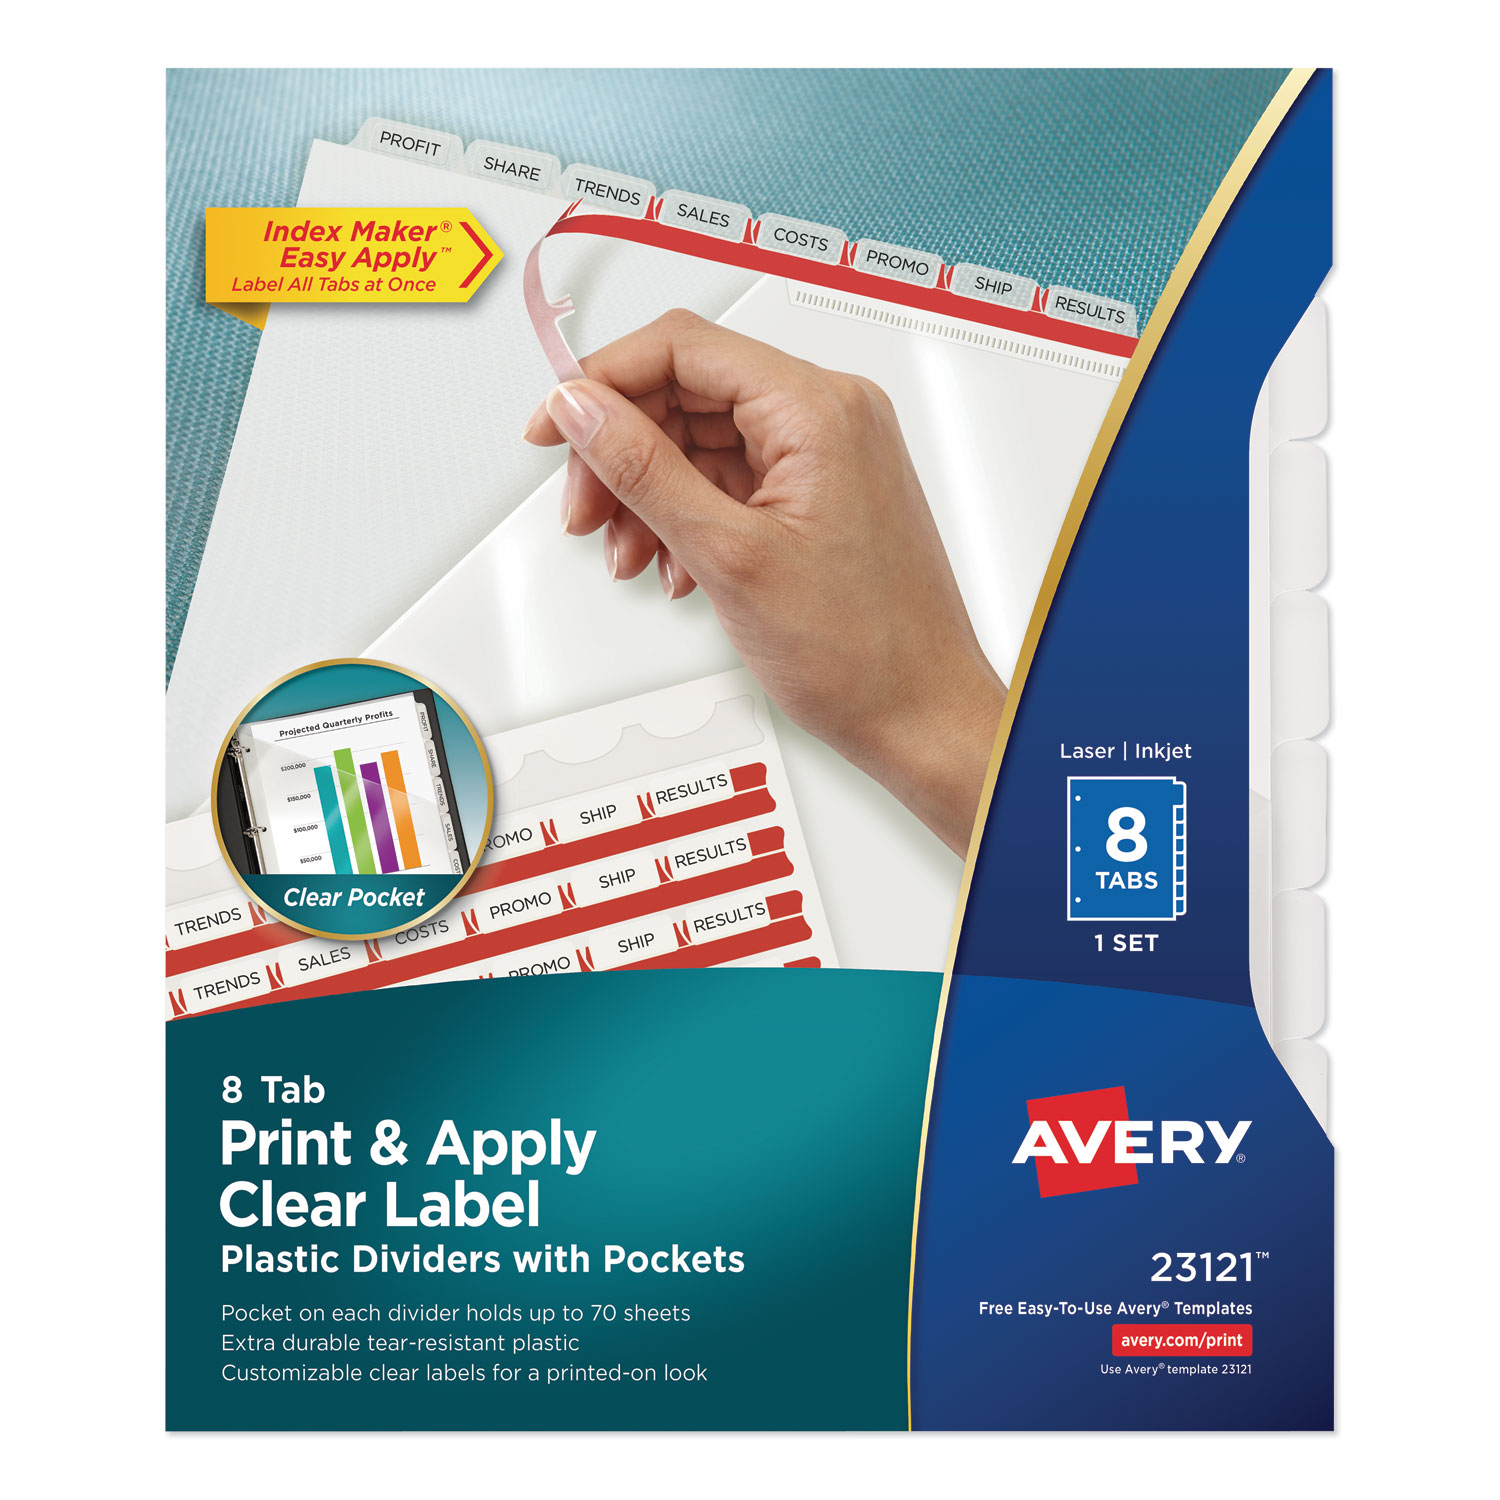  Avery 23121 Print/Apply 1-Pocket Index Maker Clear Label Plastic Dividers with Printable Label Strip, 8-Tab, 11 x 8.5, Translucent, 1 Set (AVE23121) 